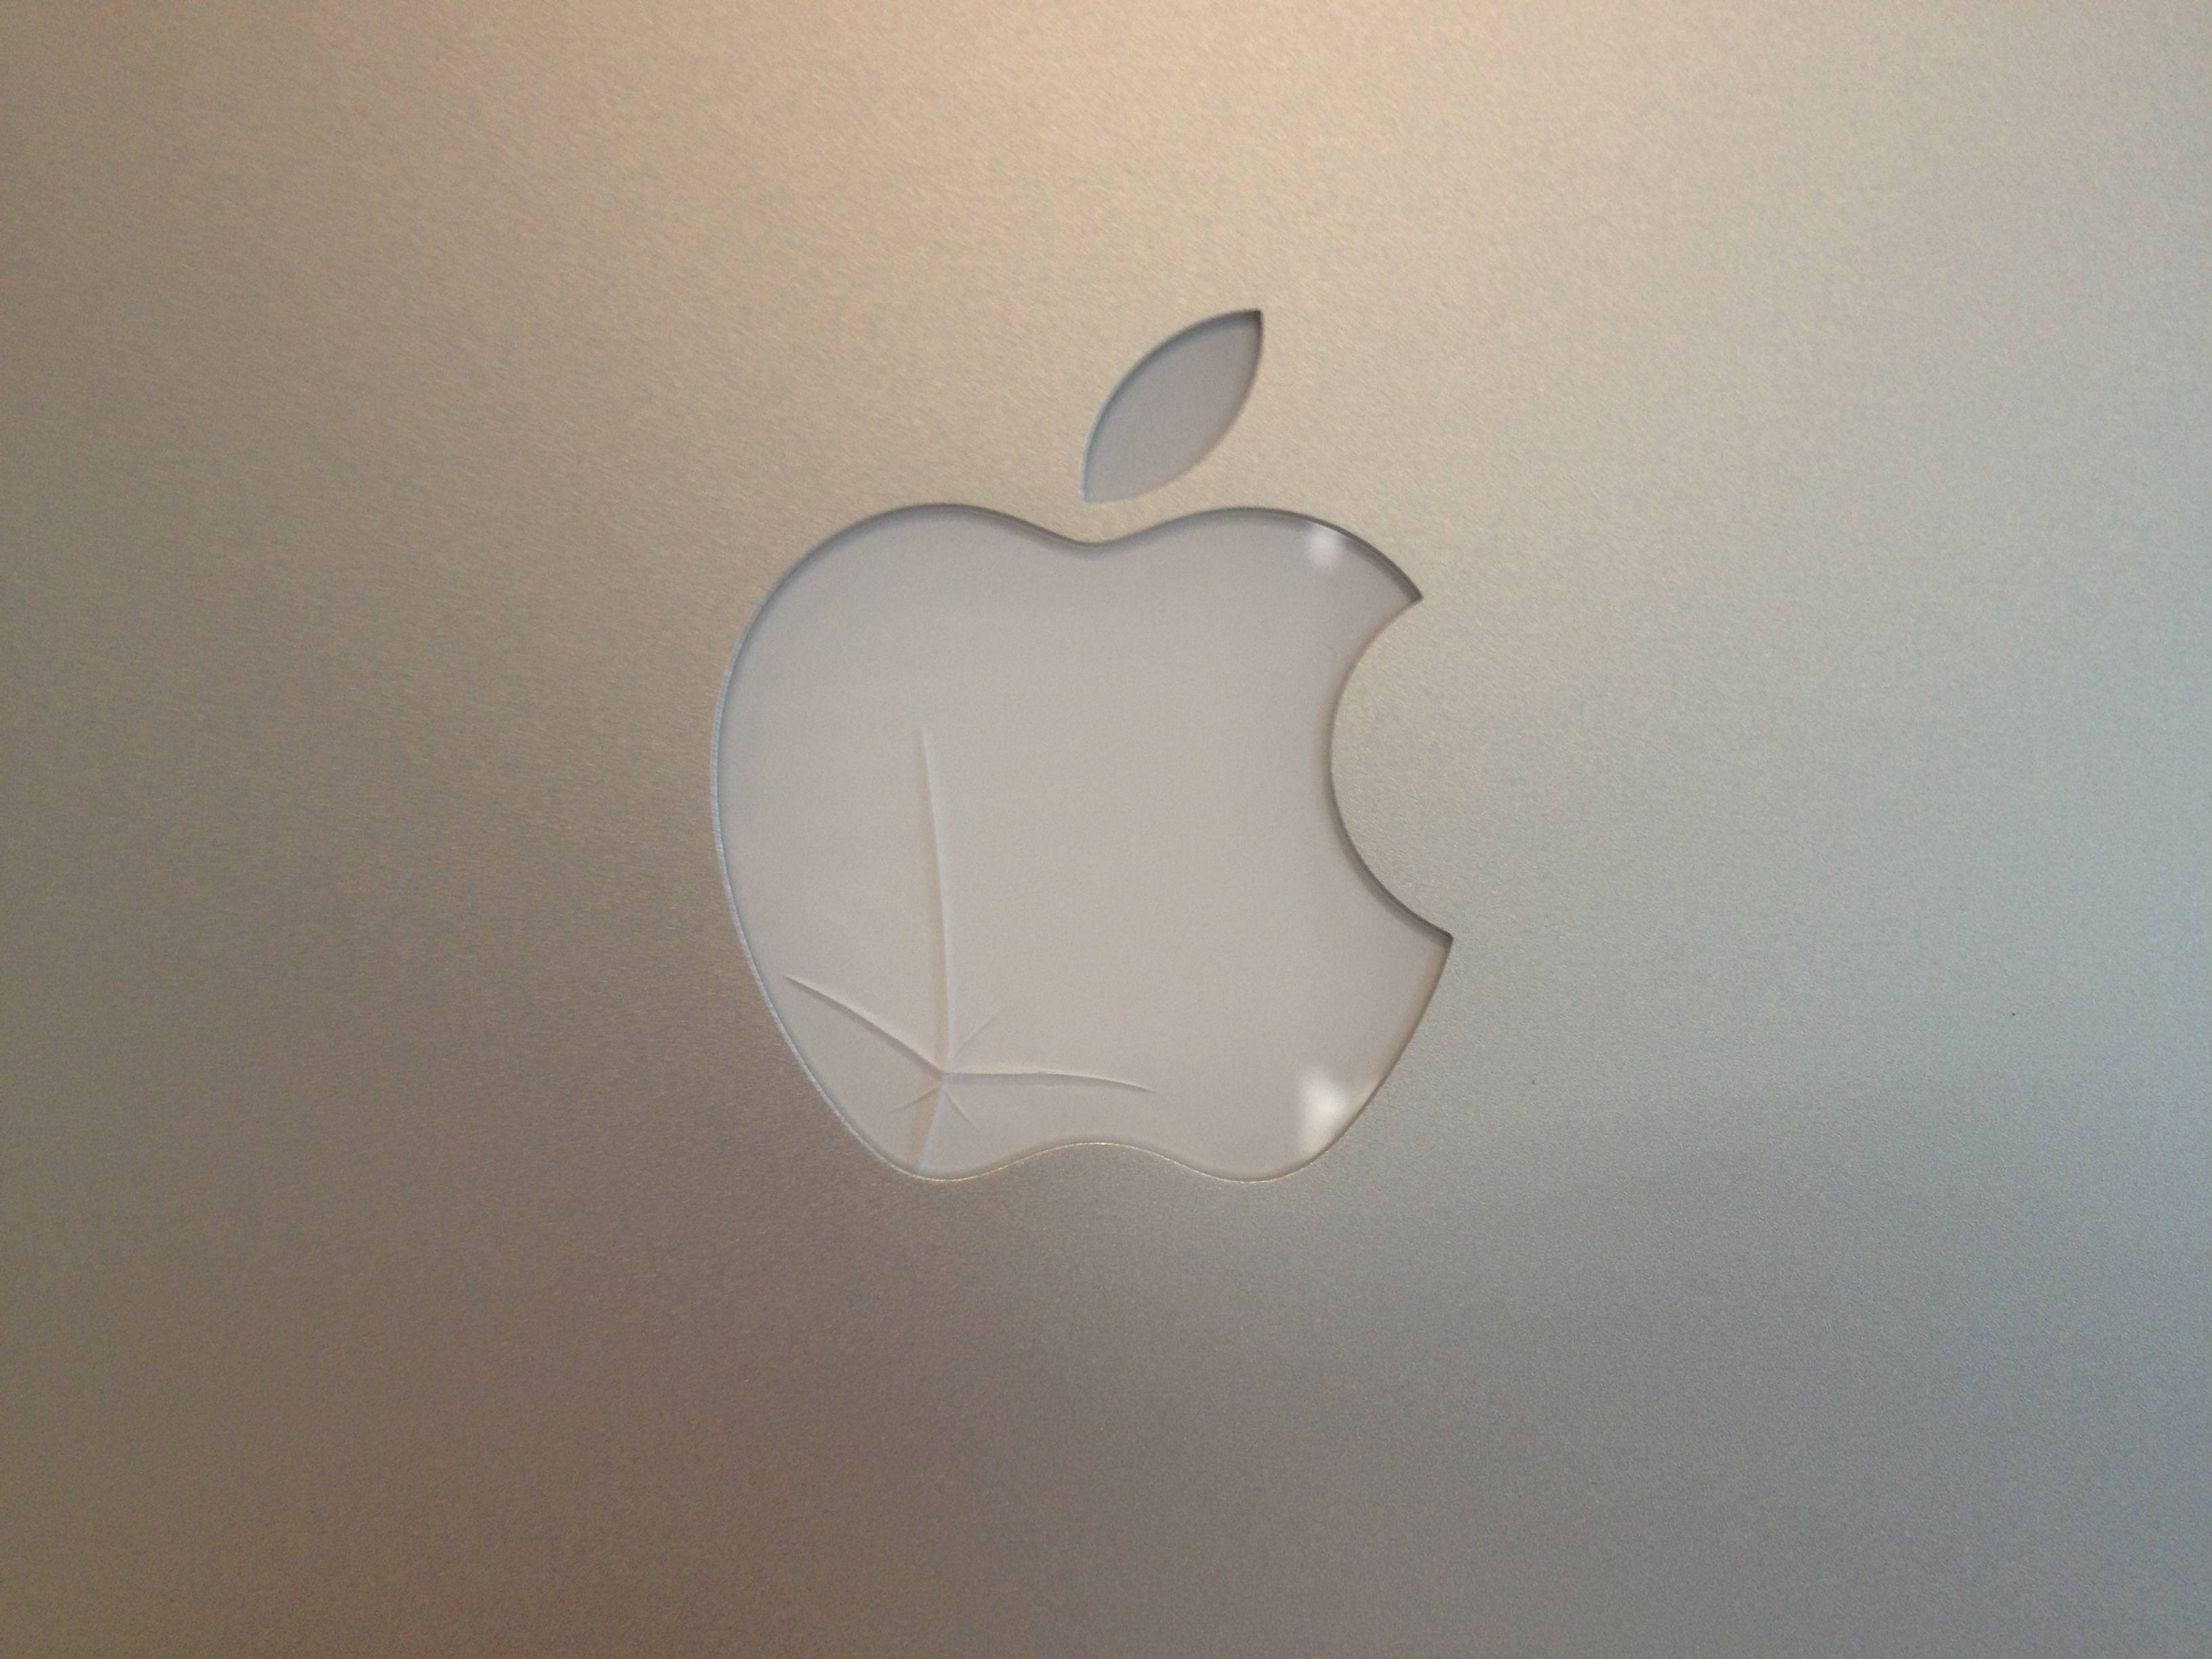 Different Apple Logo - The Apple light on my Macbook is damaged, could this damage